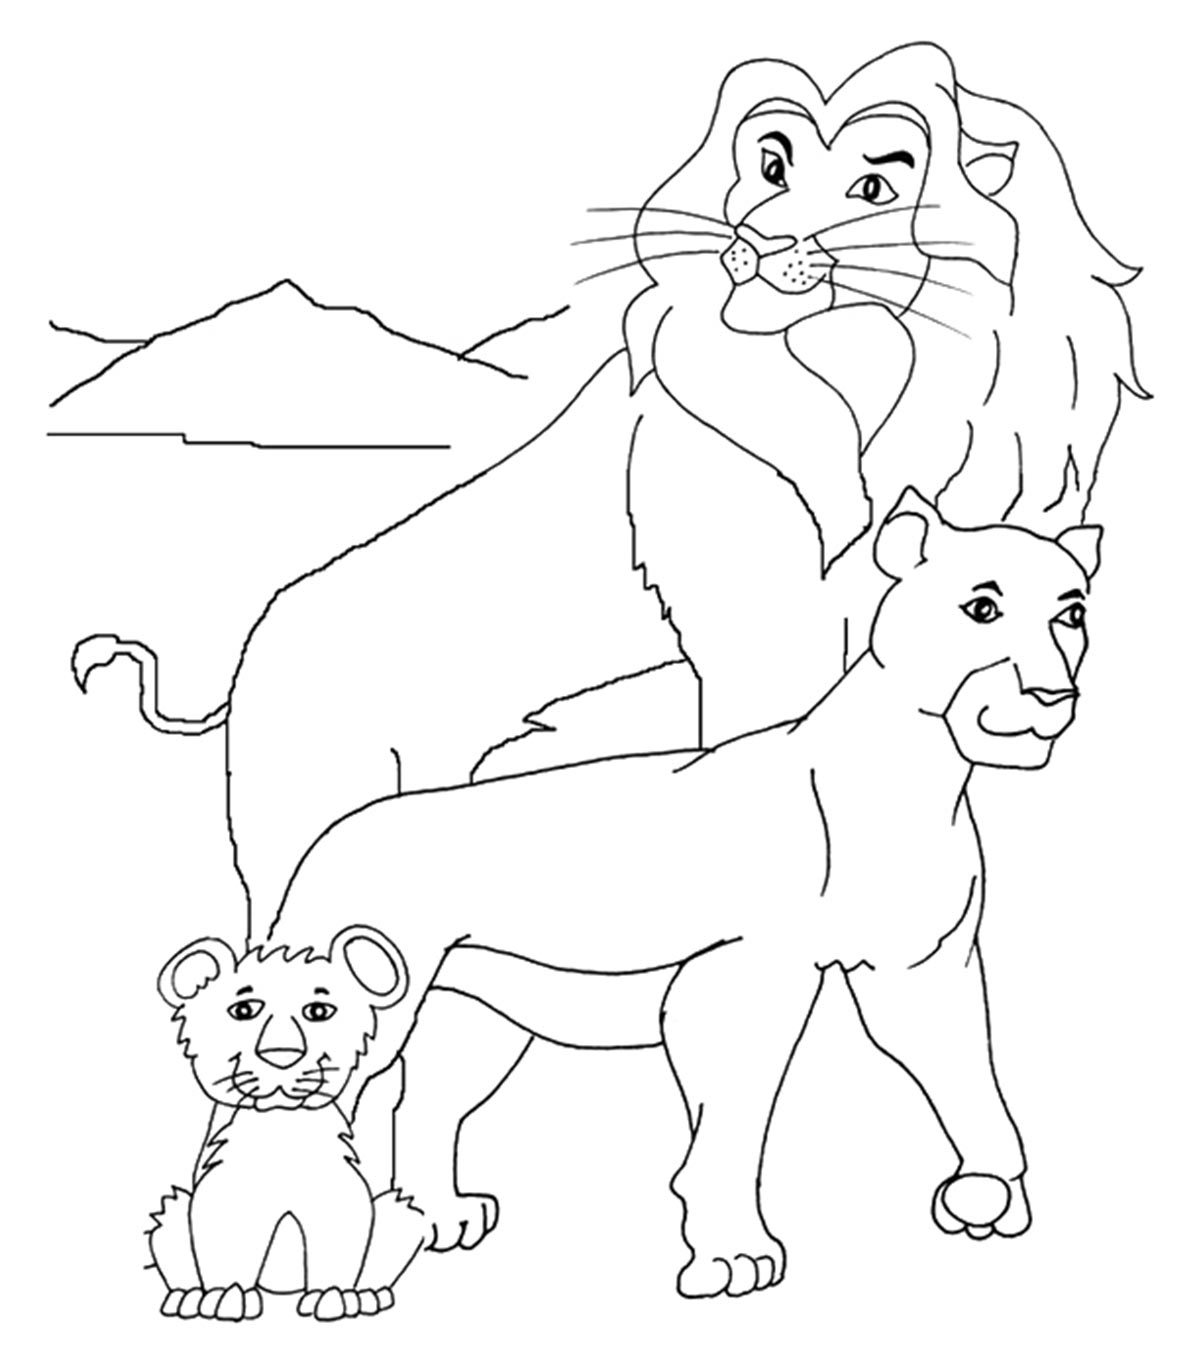 Top 20 Lion Coloring Pages Your Boys Will Love To Color